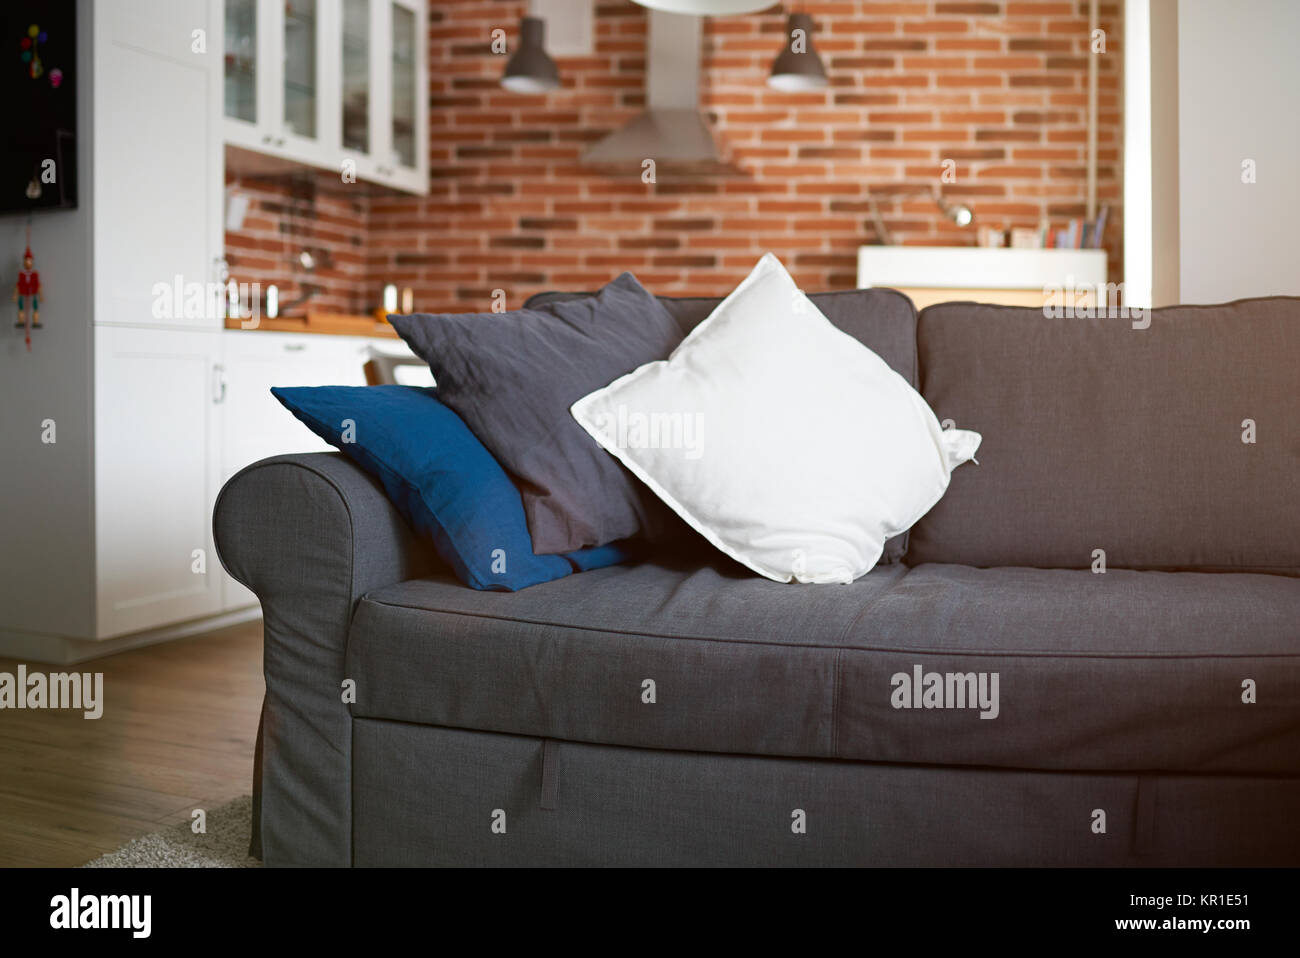 Gray sofa with kitchen on background with red brick wall Stock Photo